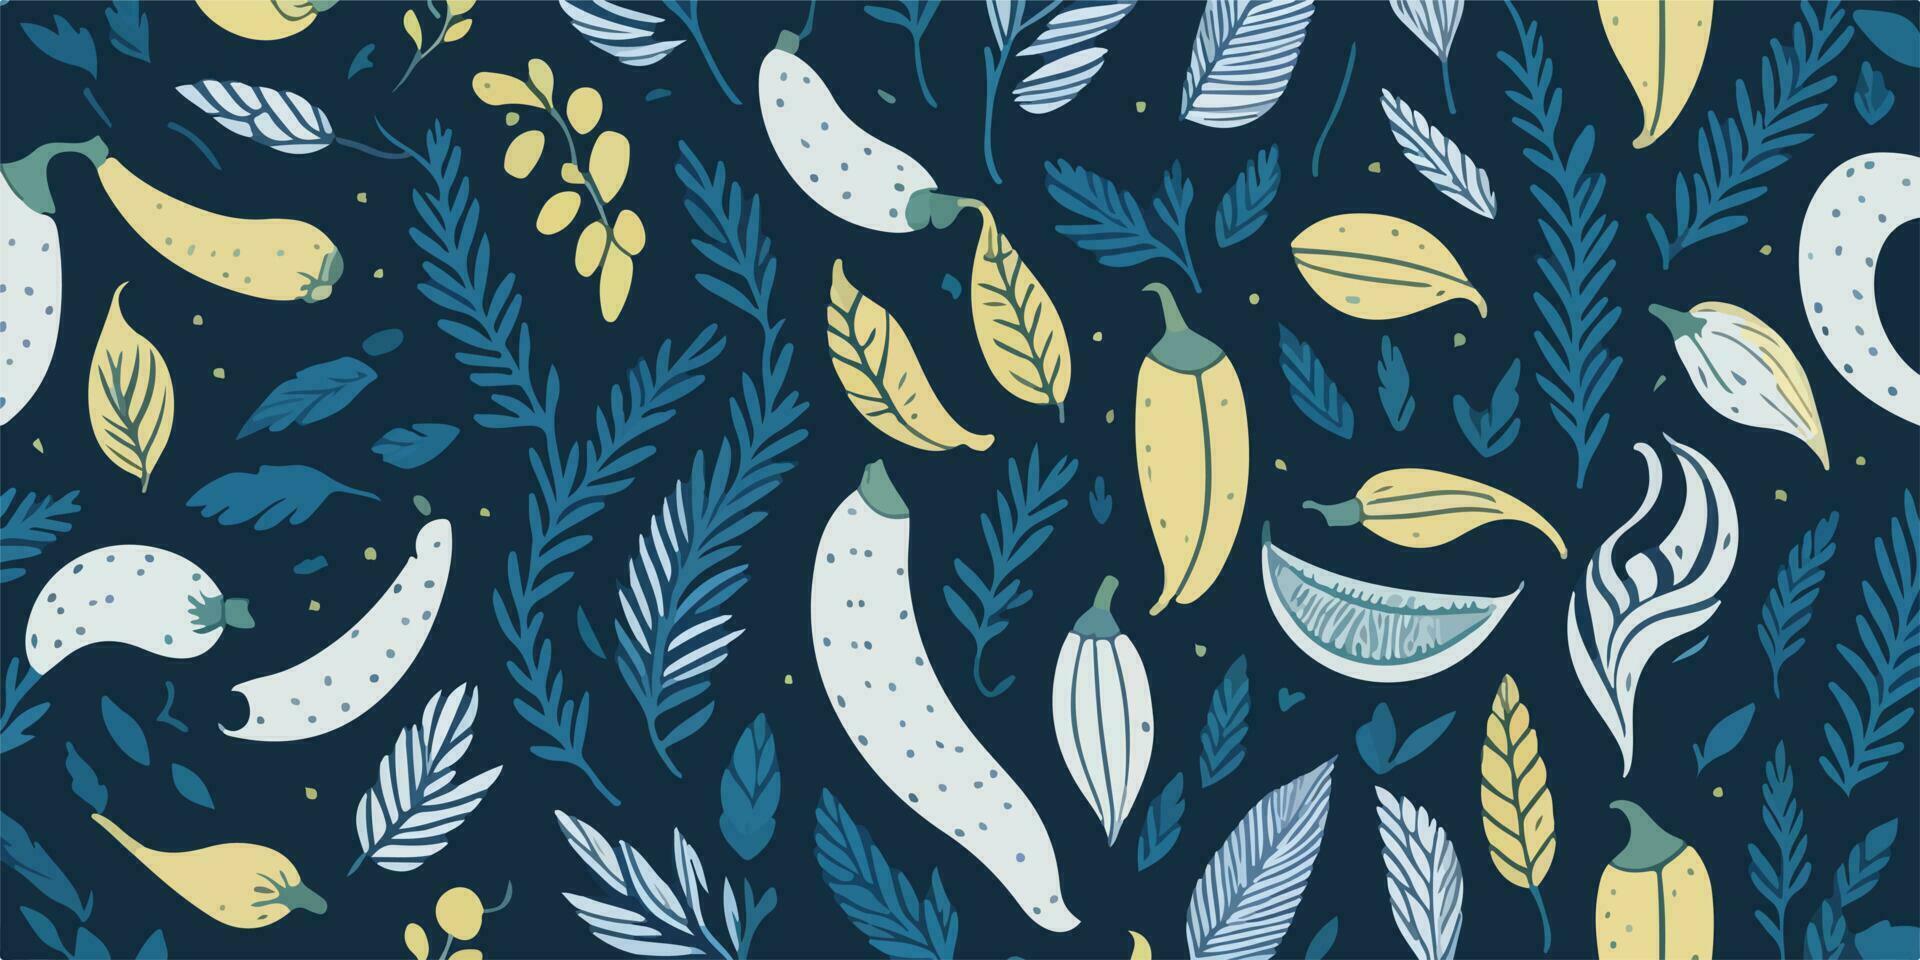 Warm Weather Whimsy, Playful Vector Illustration of Banana Patterns for Summer